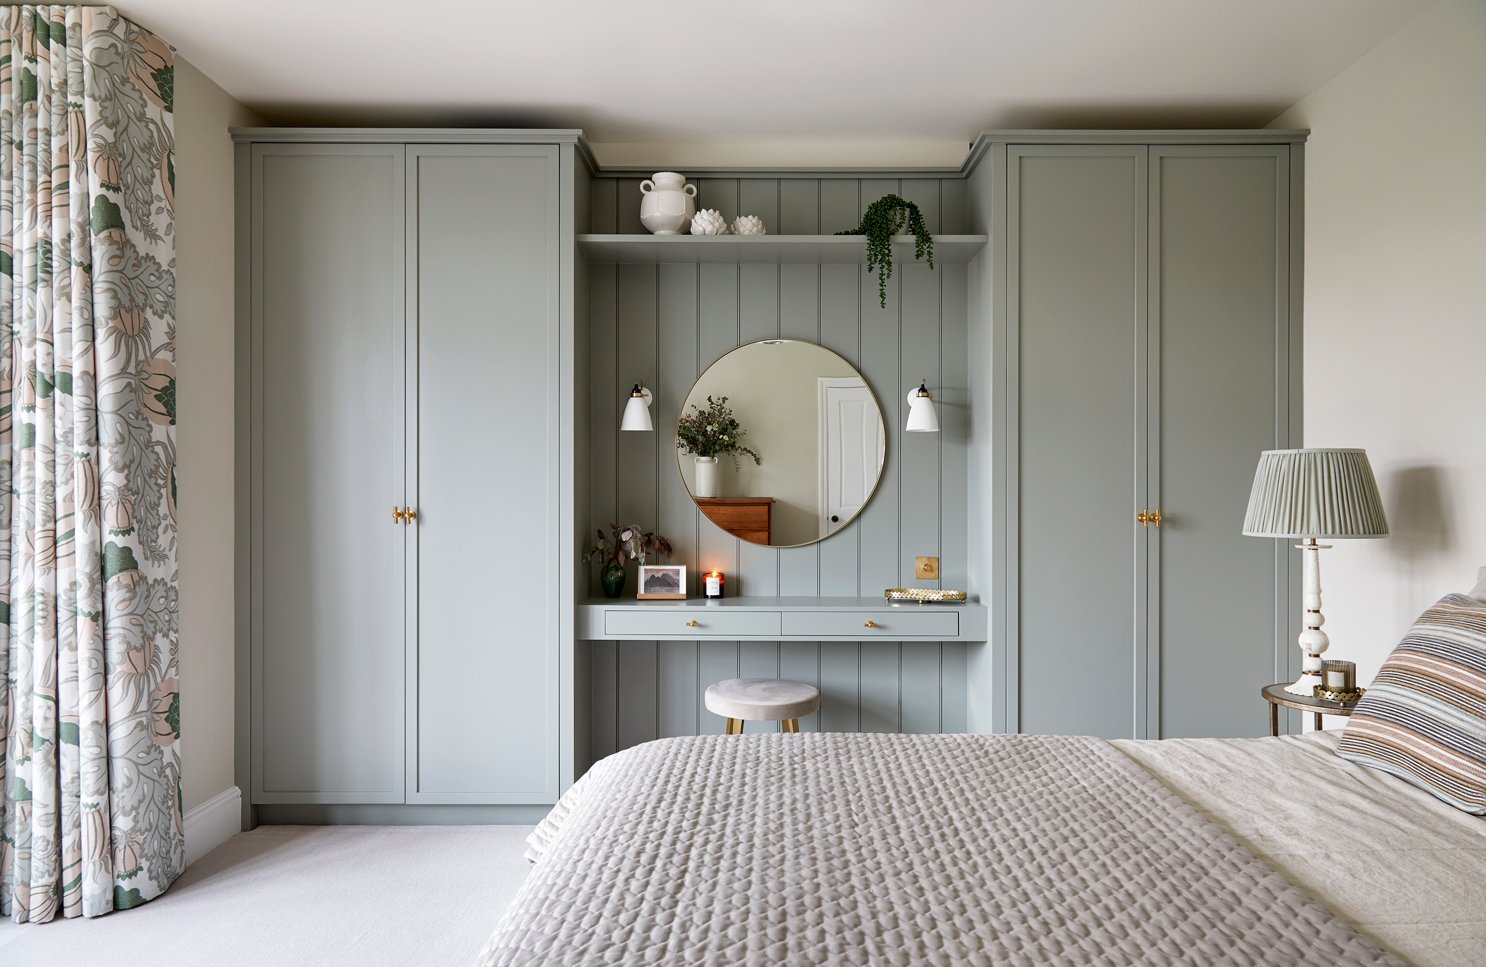 Harpenden Master bedroom design with Fitted wardrobes and dressing table Alison Anderson Interiors.jpg